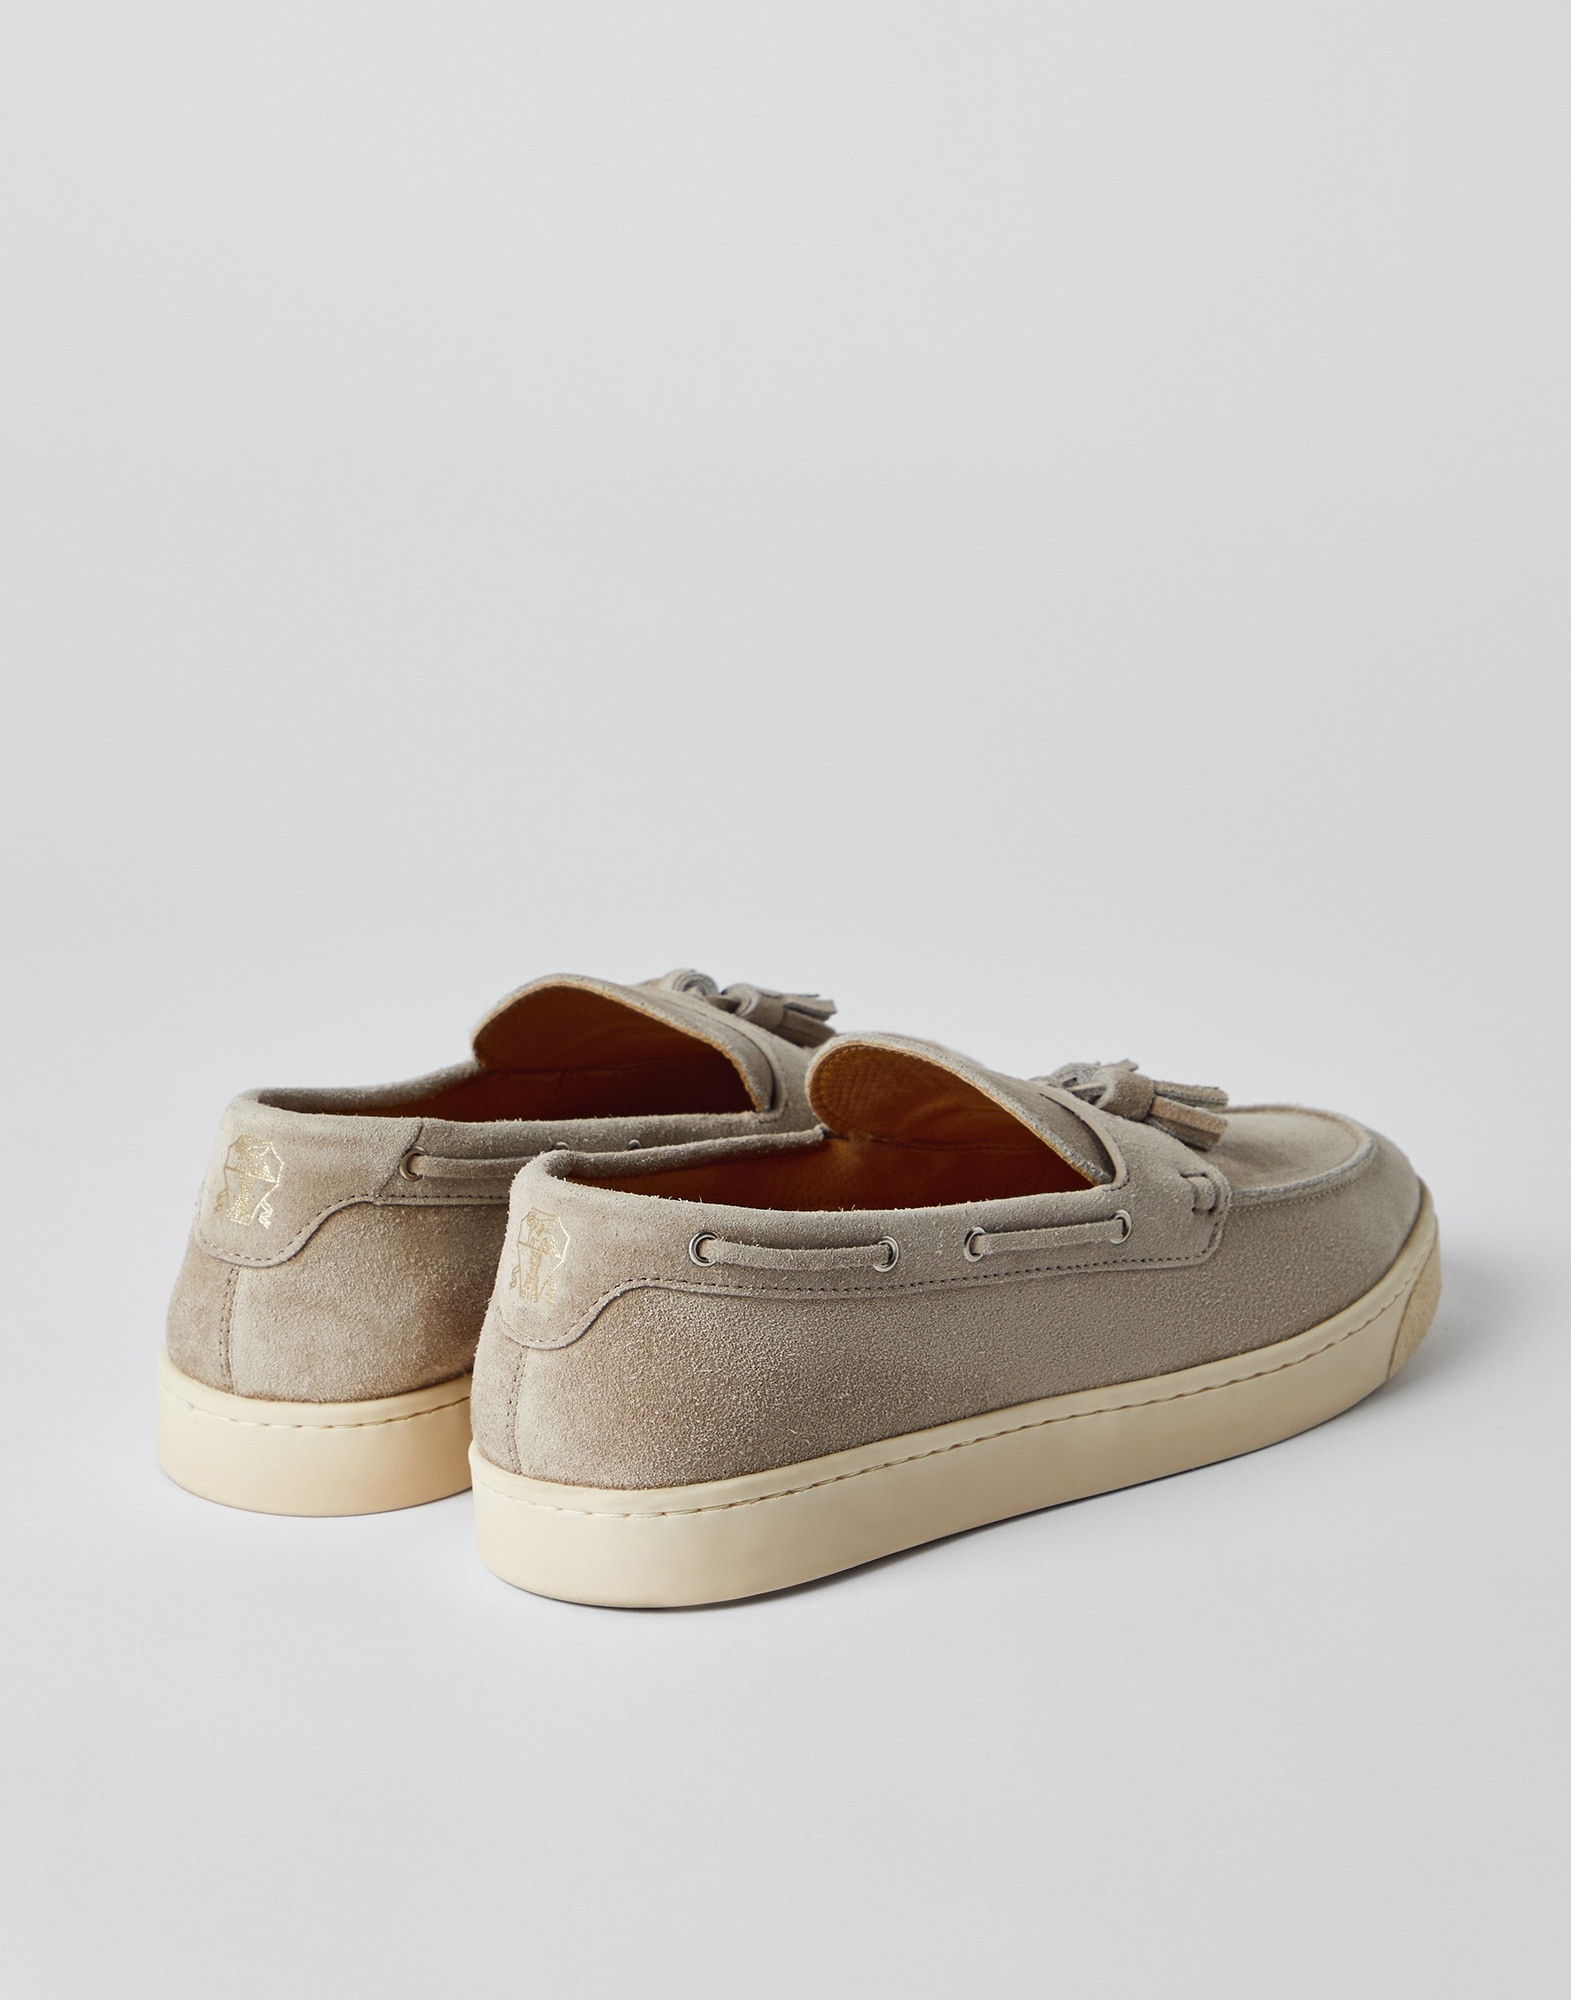 Suede loafer sneakers with tassels and natural rubber sole - 3